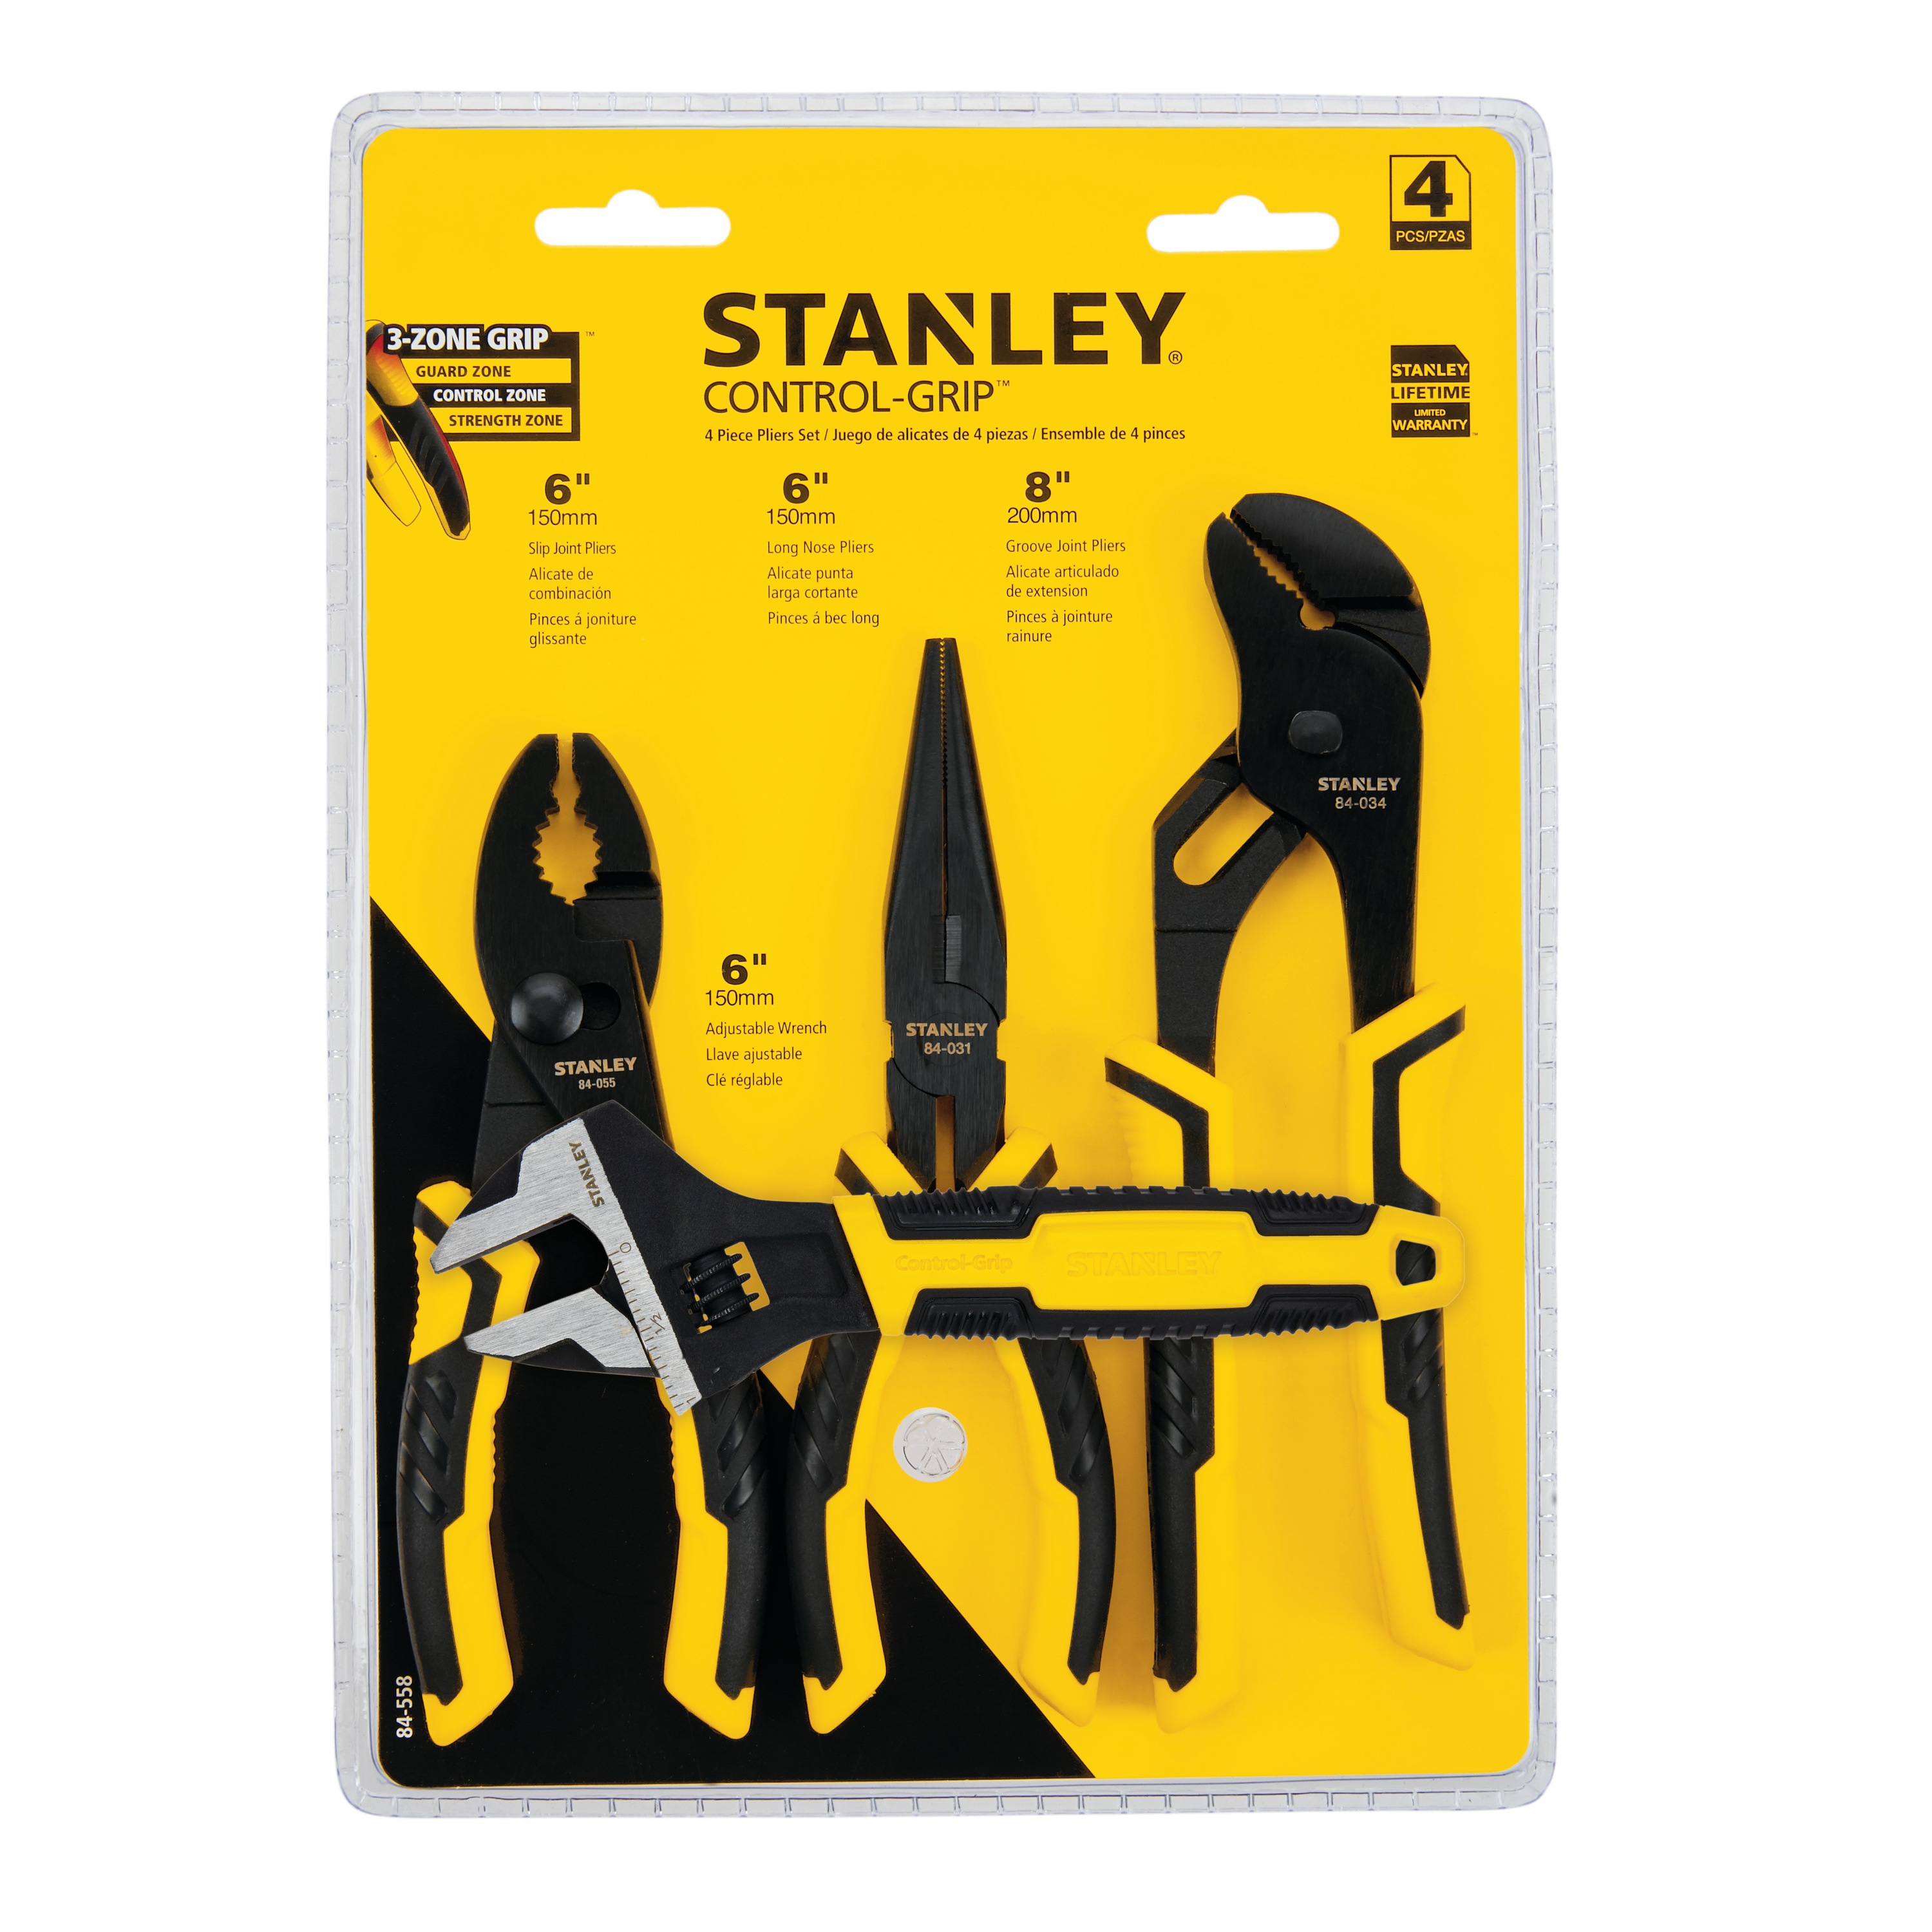 Stanley Tools - 4pc Pliers and Adjustable Wrench Set - 84-558